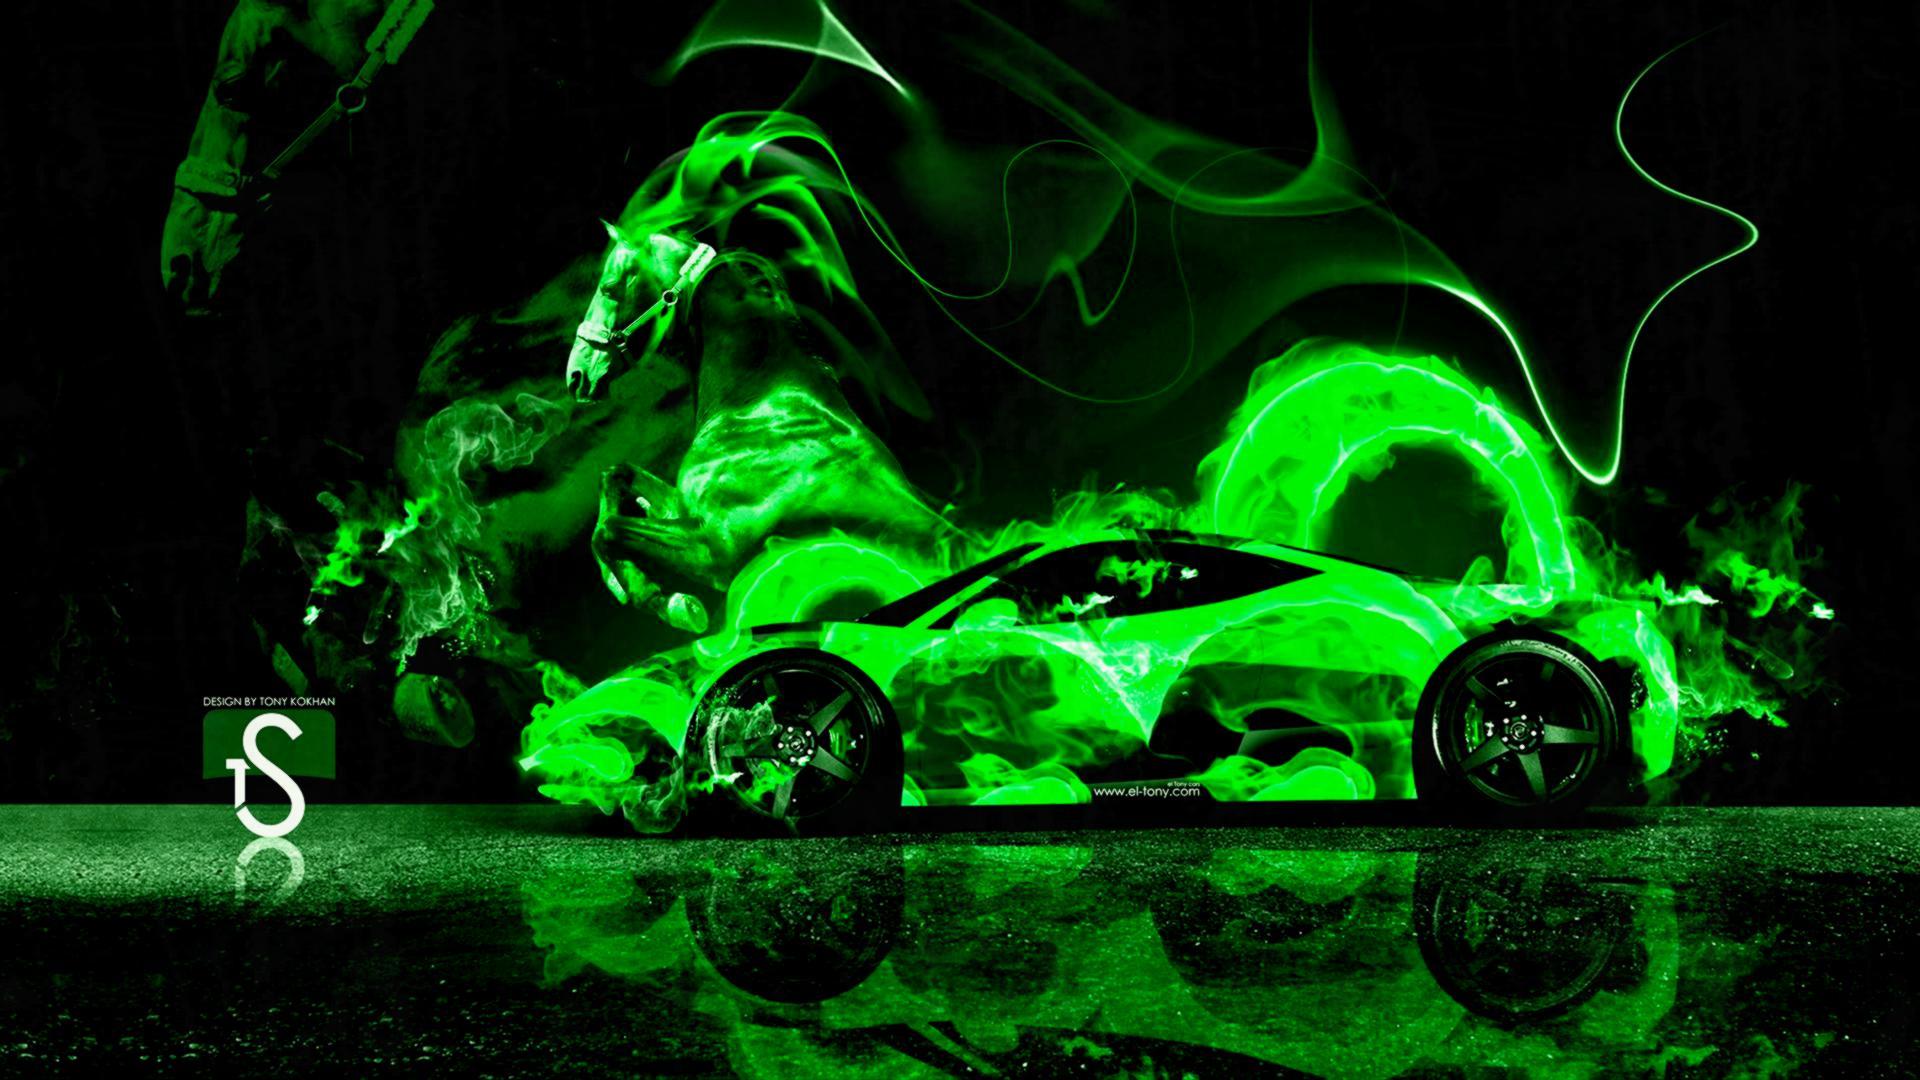 Car Fire Pictures  Download Free Images on Unsplash